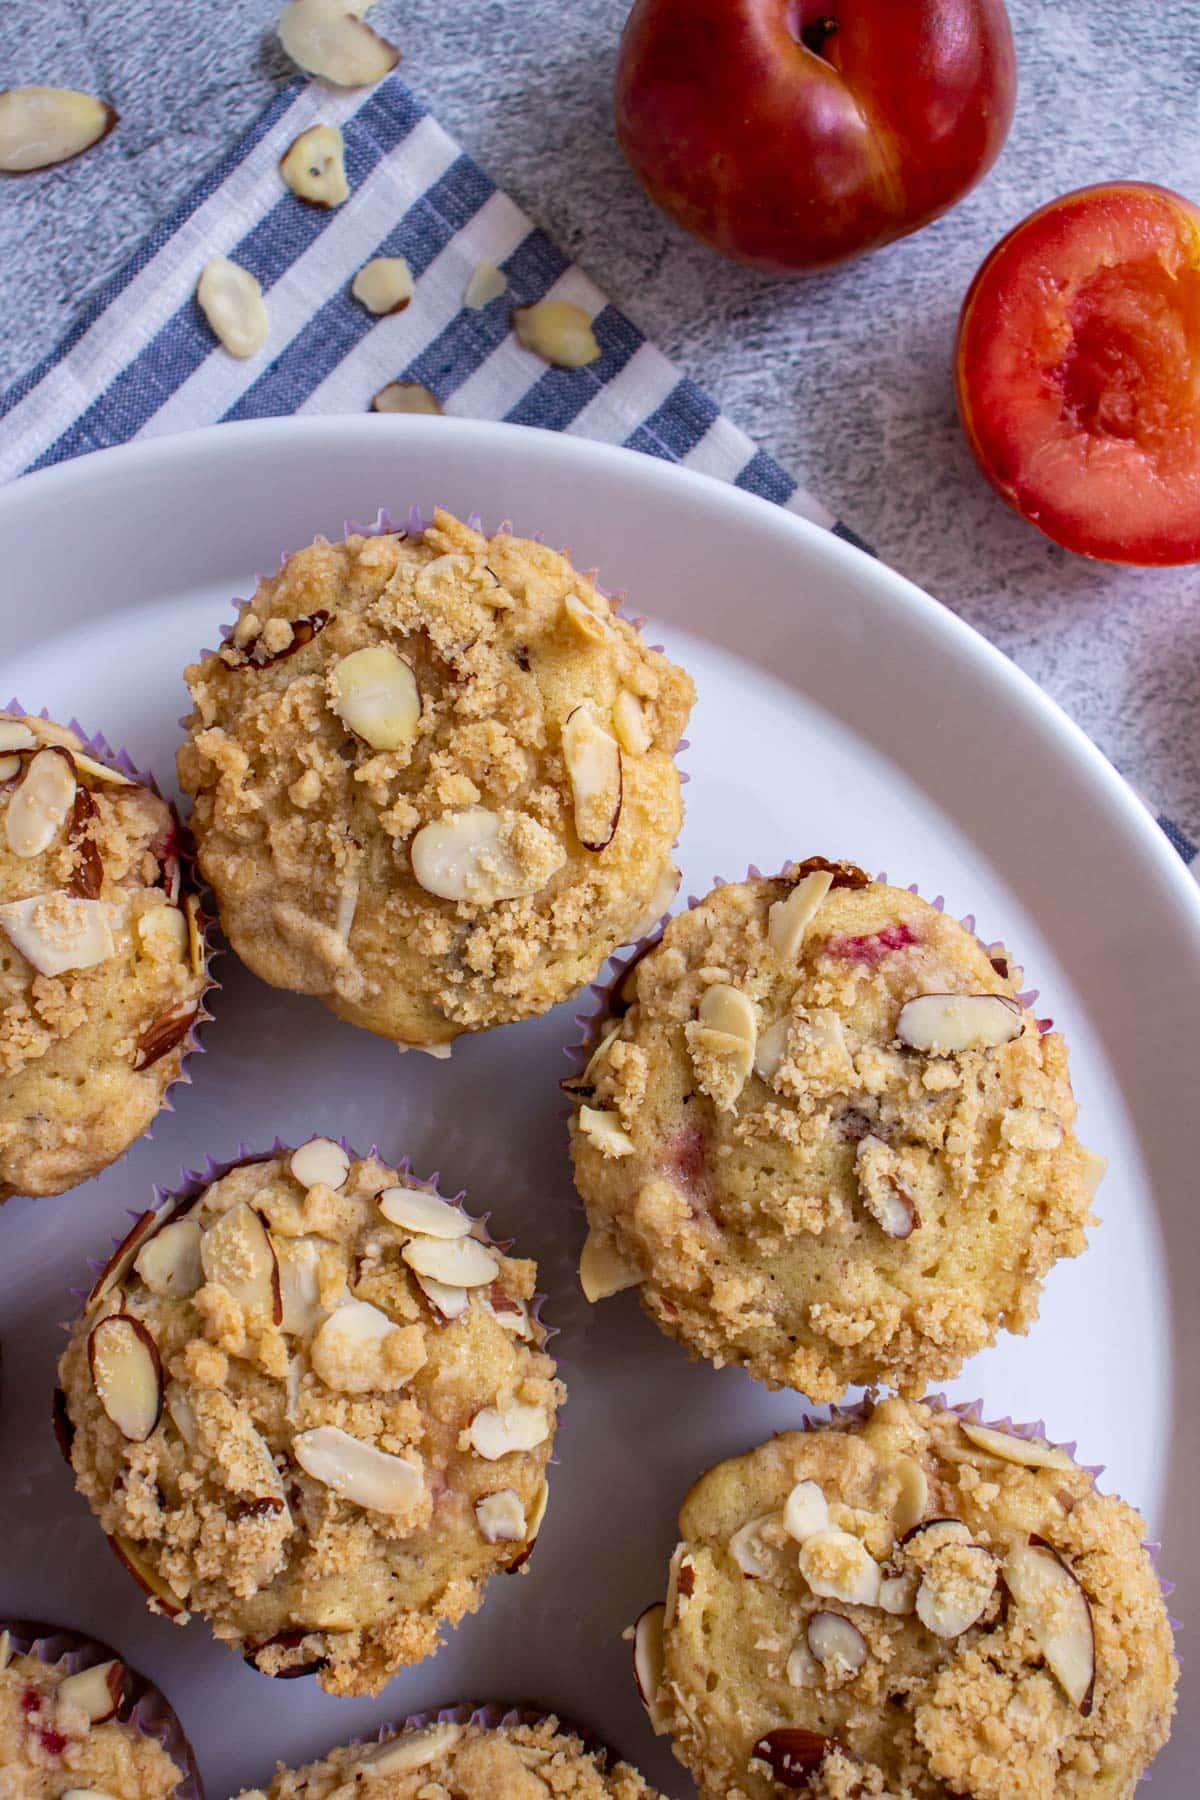 Muffins on a round white plate with sliced almonds and plums next to the plate.